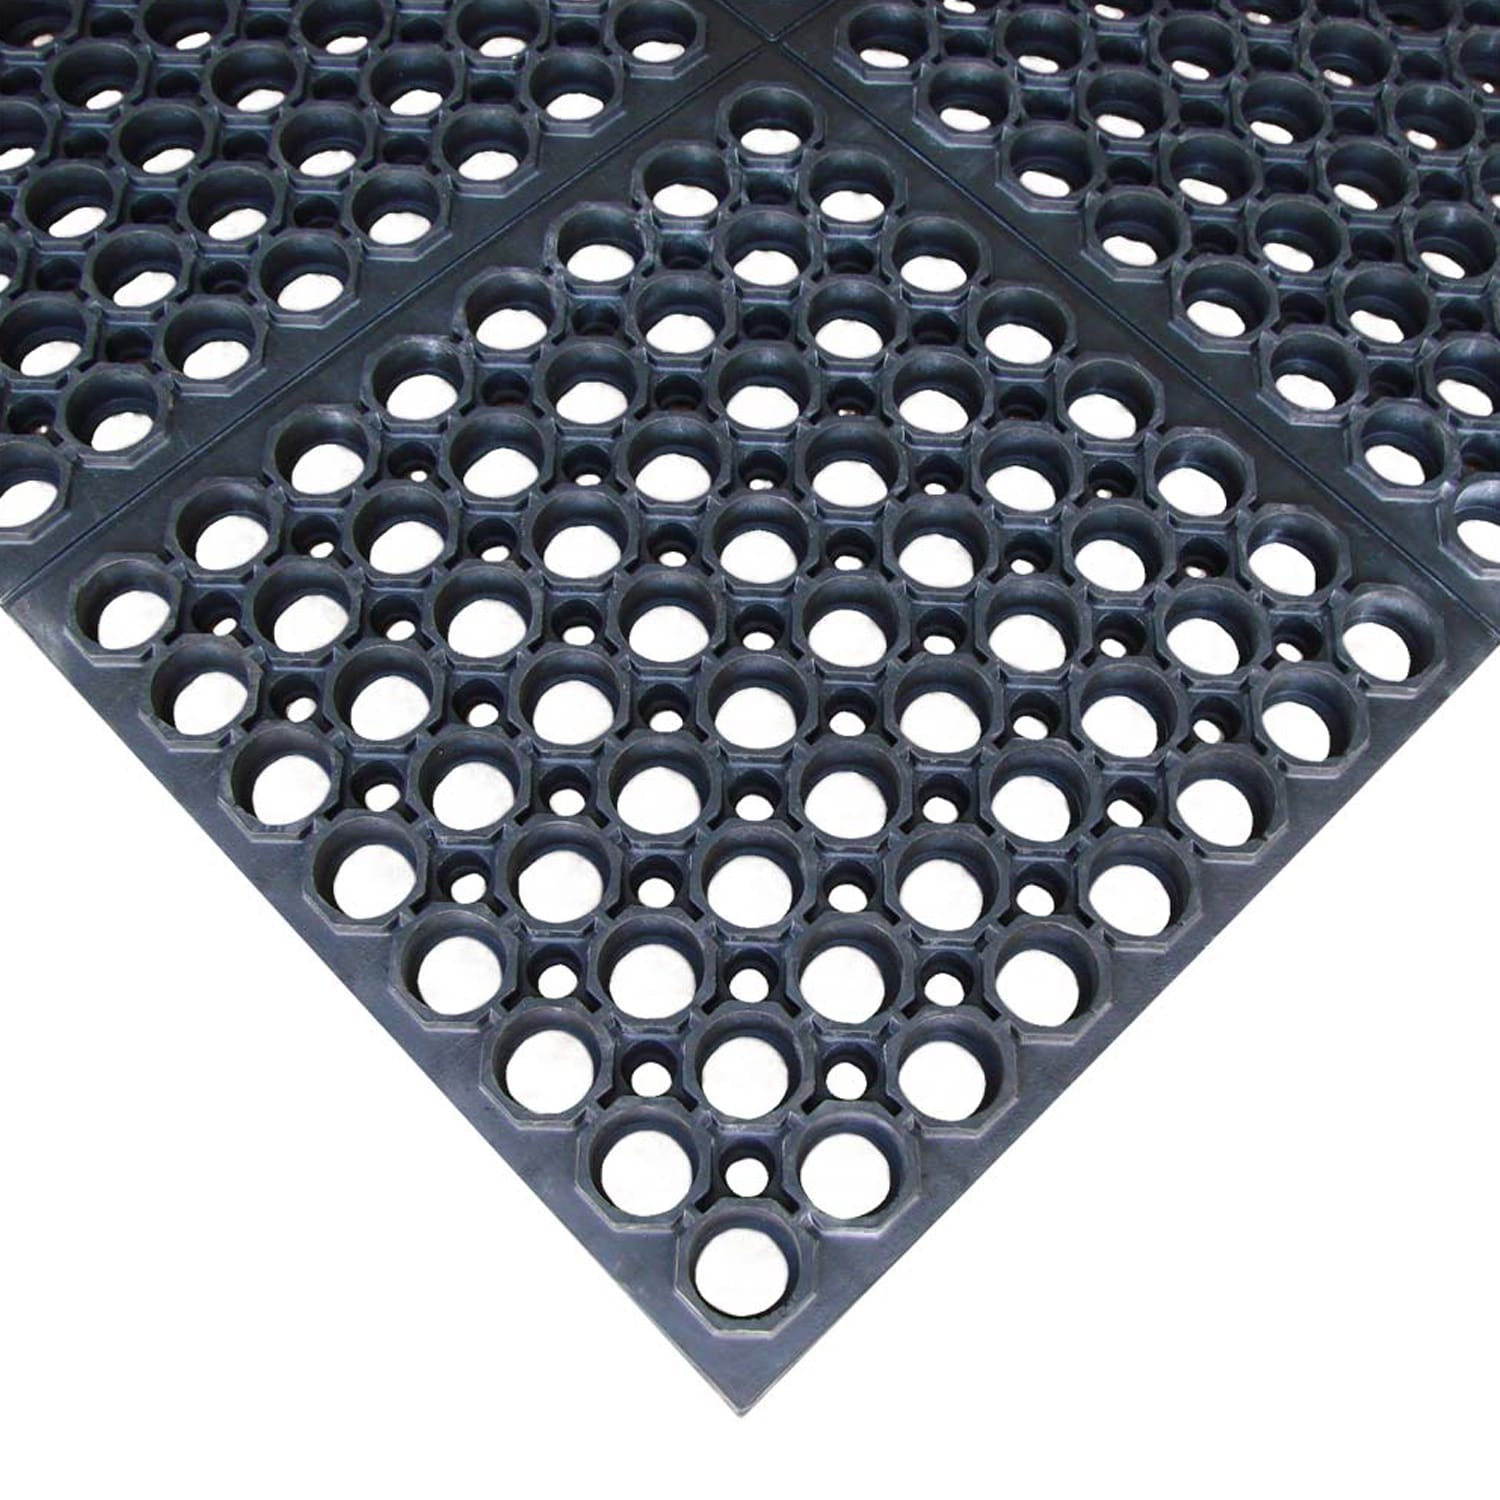 Serve Secure Red Rubber Floor Mat - Anti-Fatigue, Grease-Resistant - 60 x  36 x 1/2 